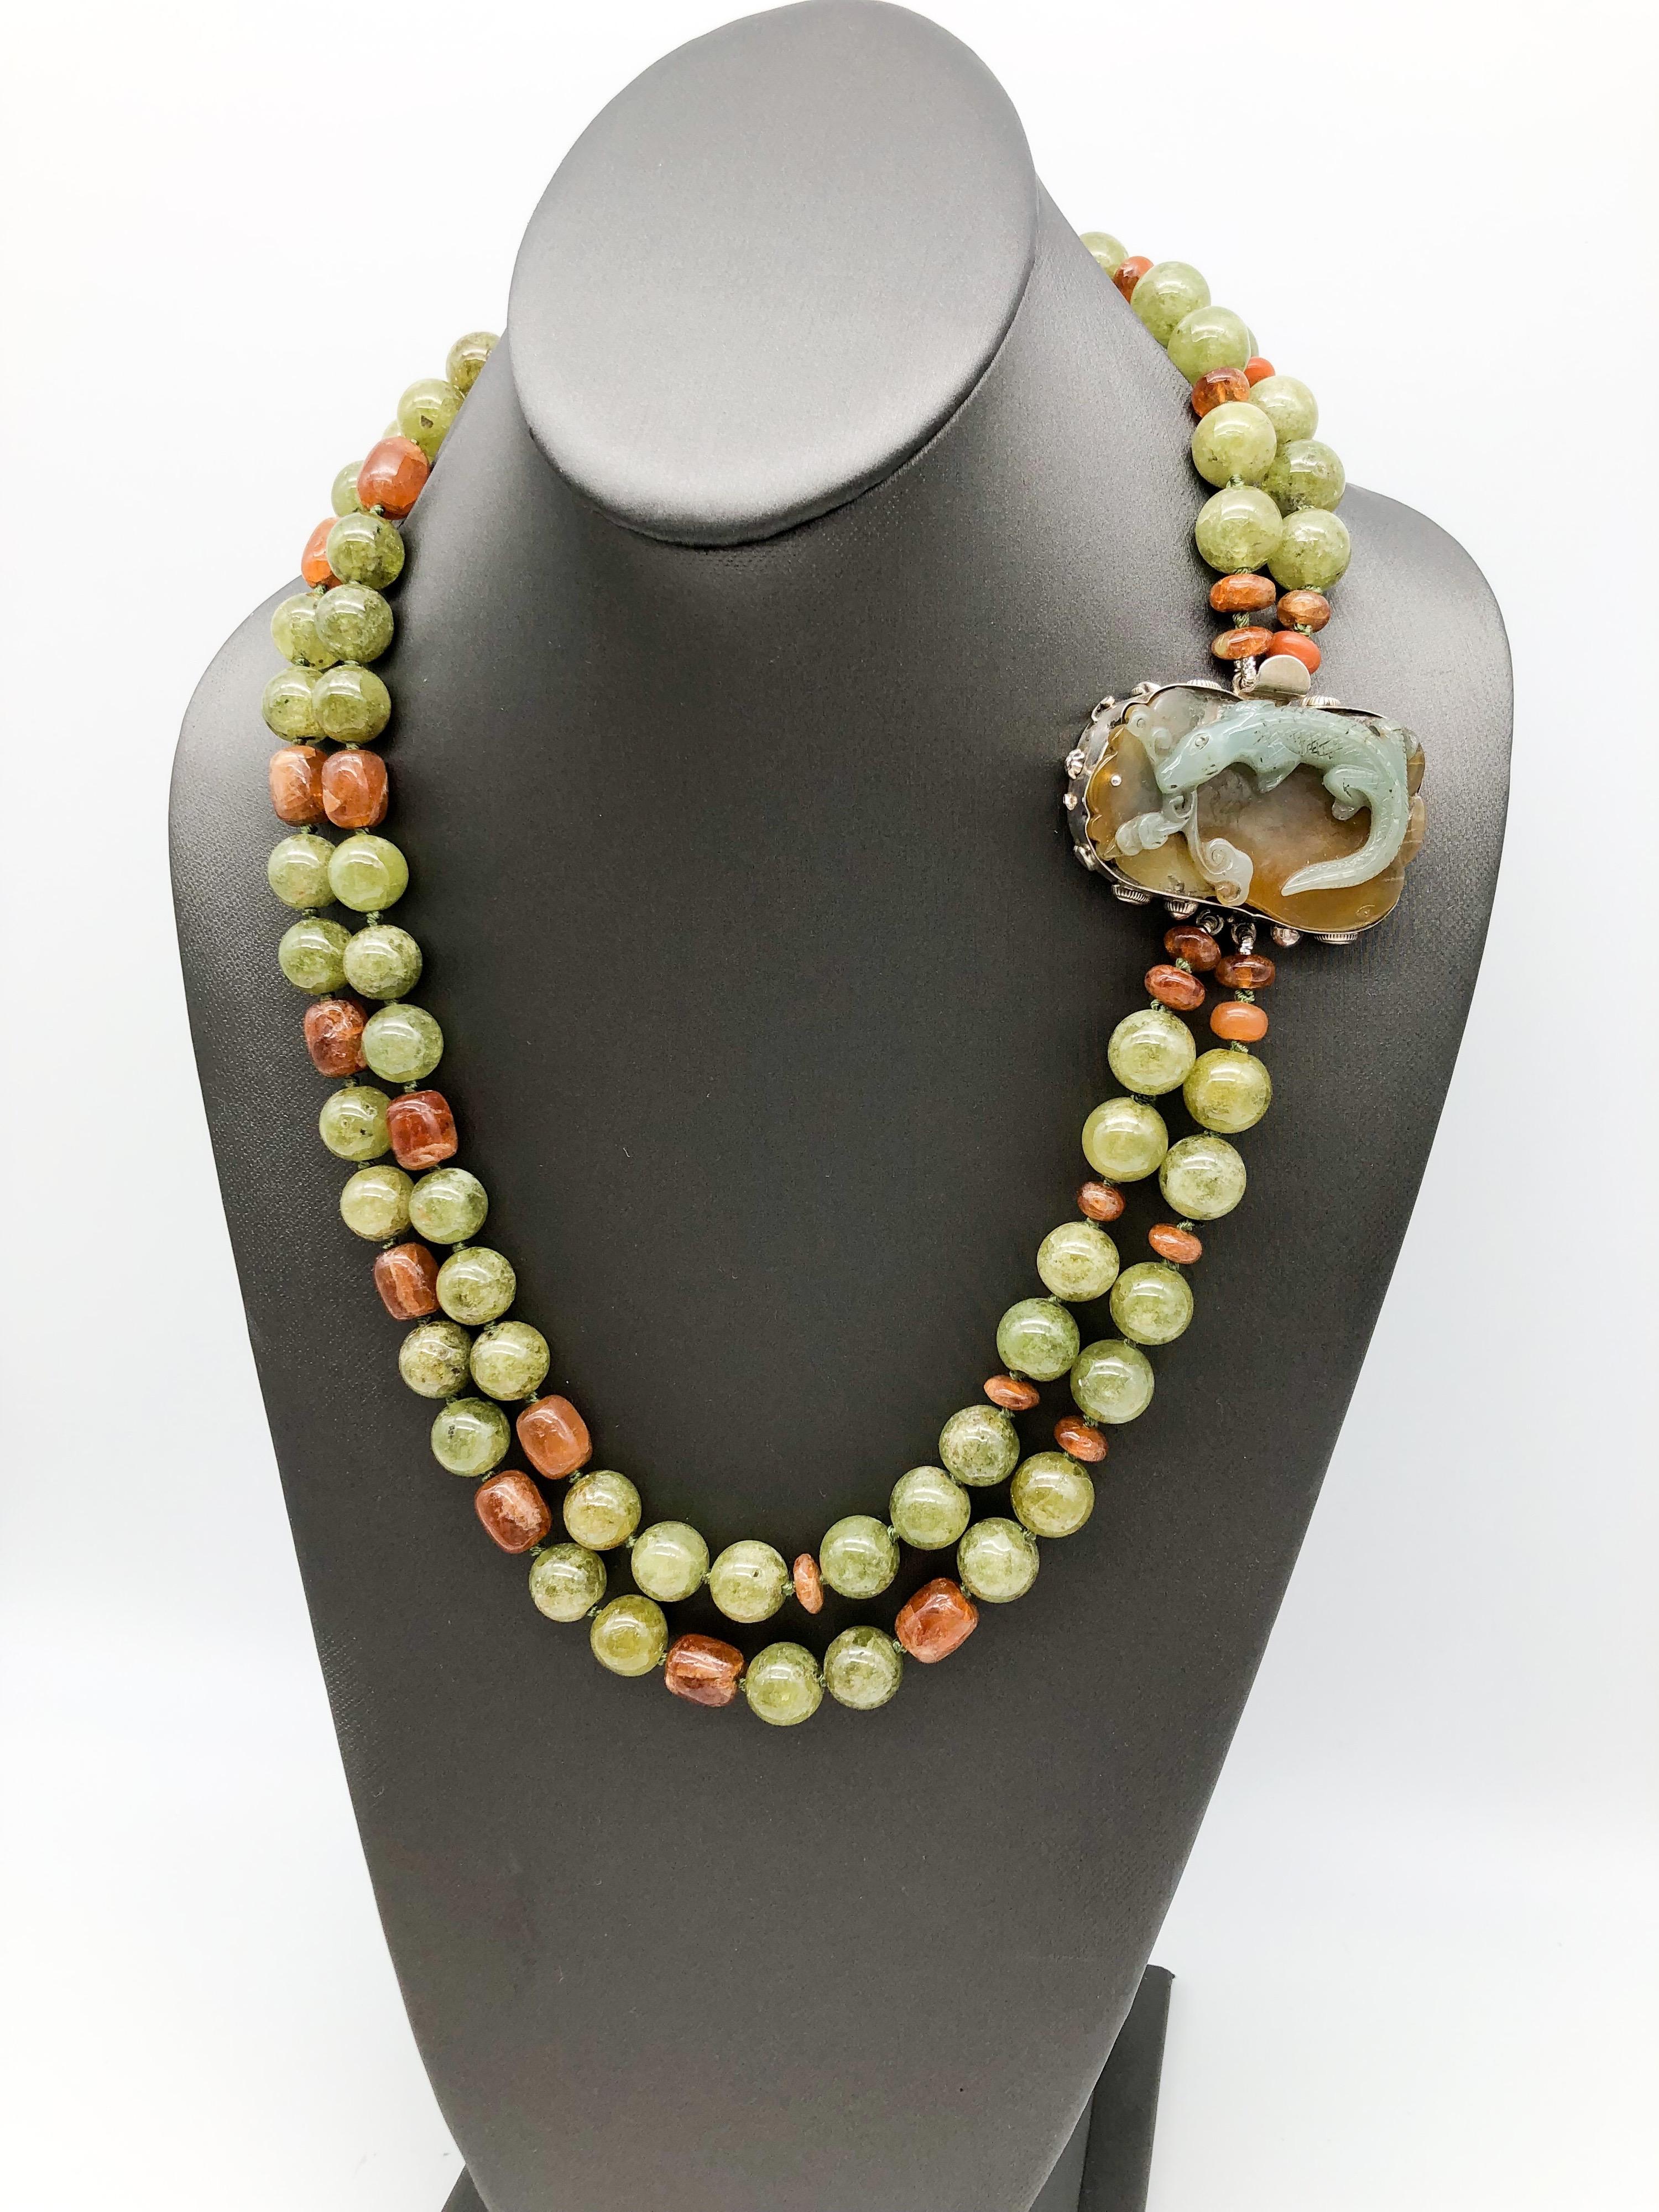 One-of-a-Kind
Double strand green Garnet necklace supports a carved Jade crocodile clasp in the same color tones.
Not all garnet is the well-known burgundy color.In fact, green garnet, known as Grossular, is rarer than the red stone and particularly